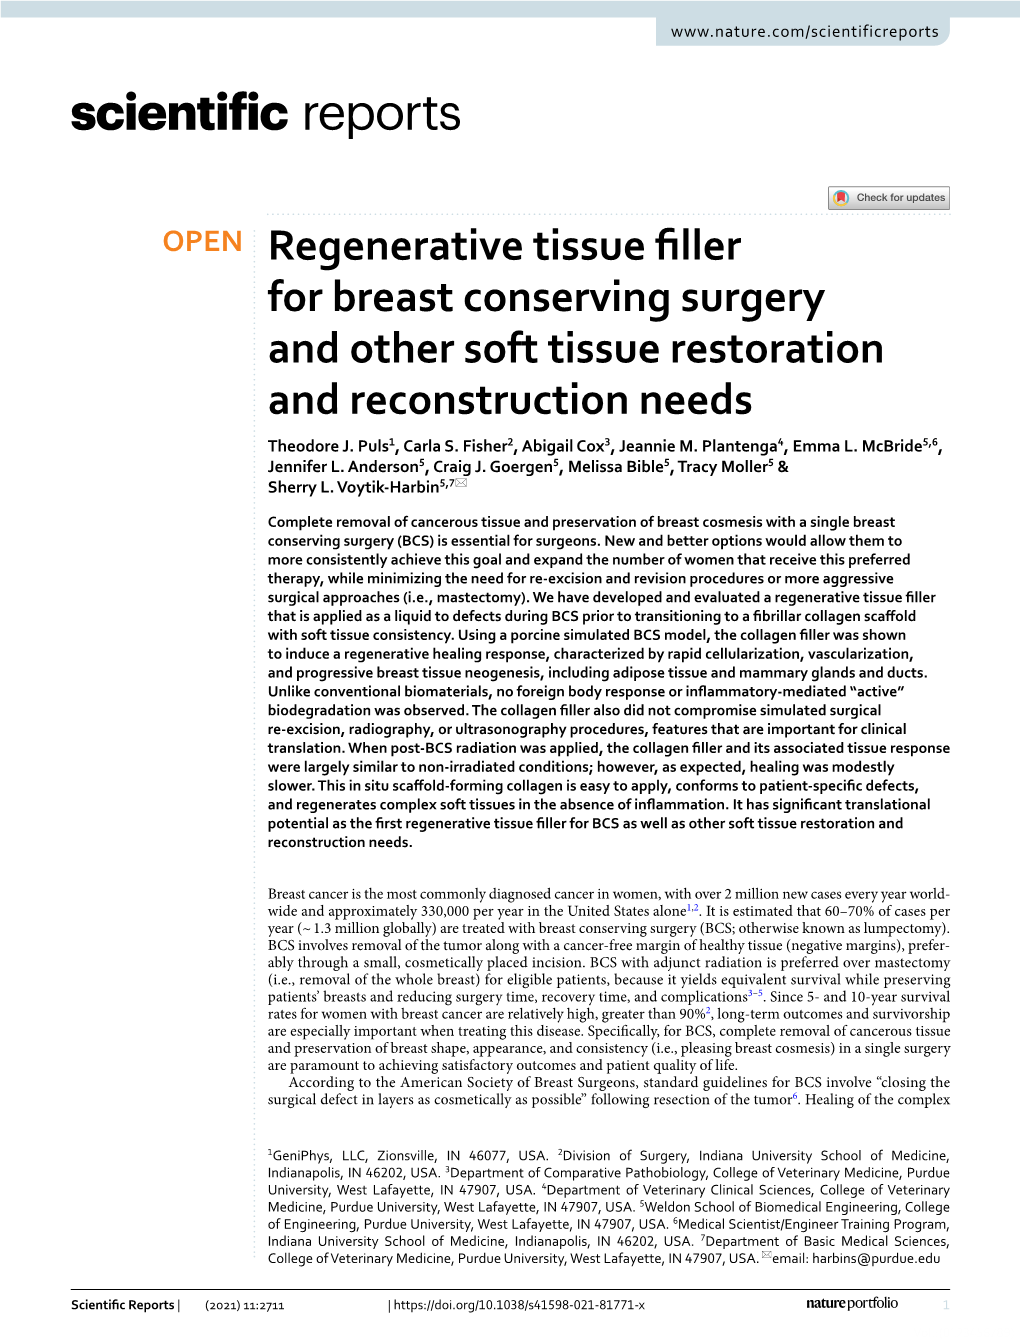 Regenerative Tissue Filler for Breast Conserving Surgery and Other Soft Tissue Restoration and Reconstruction Needs